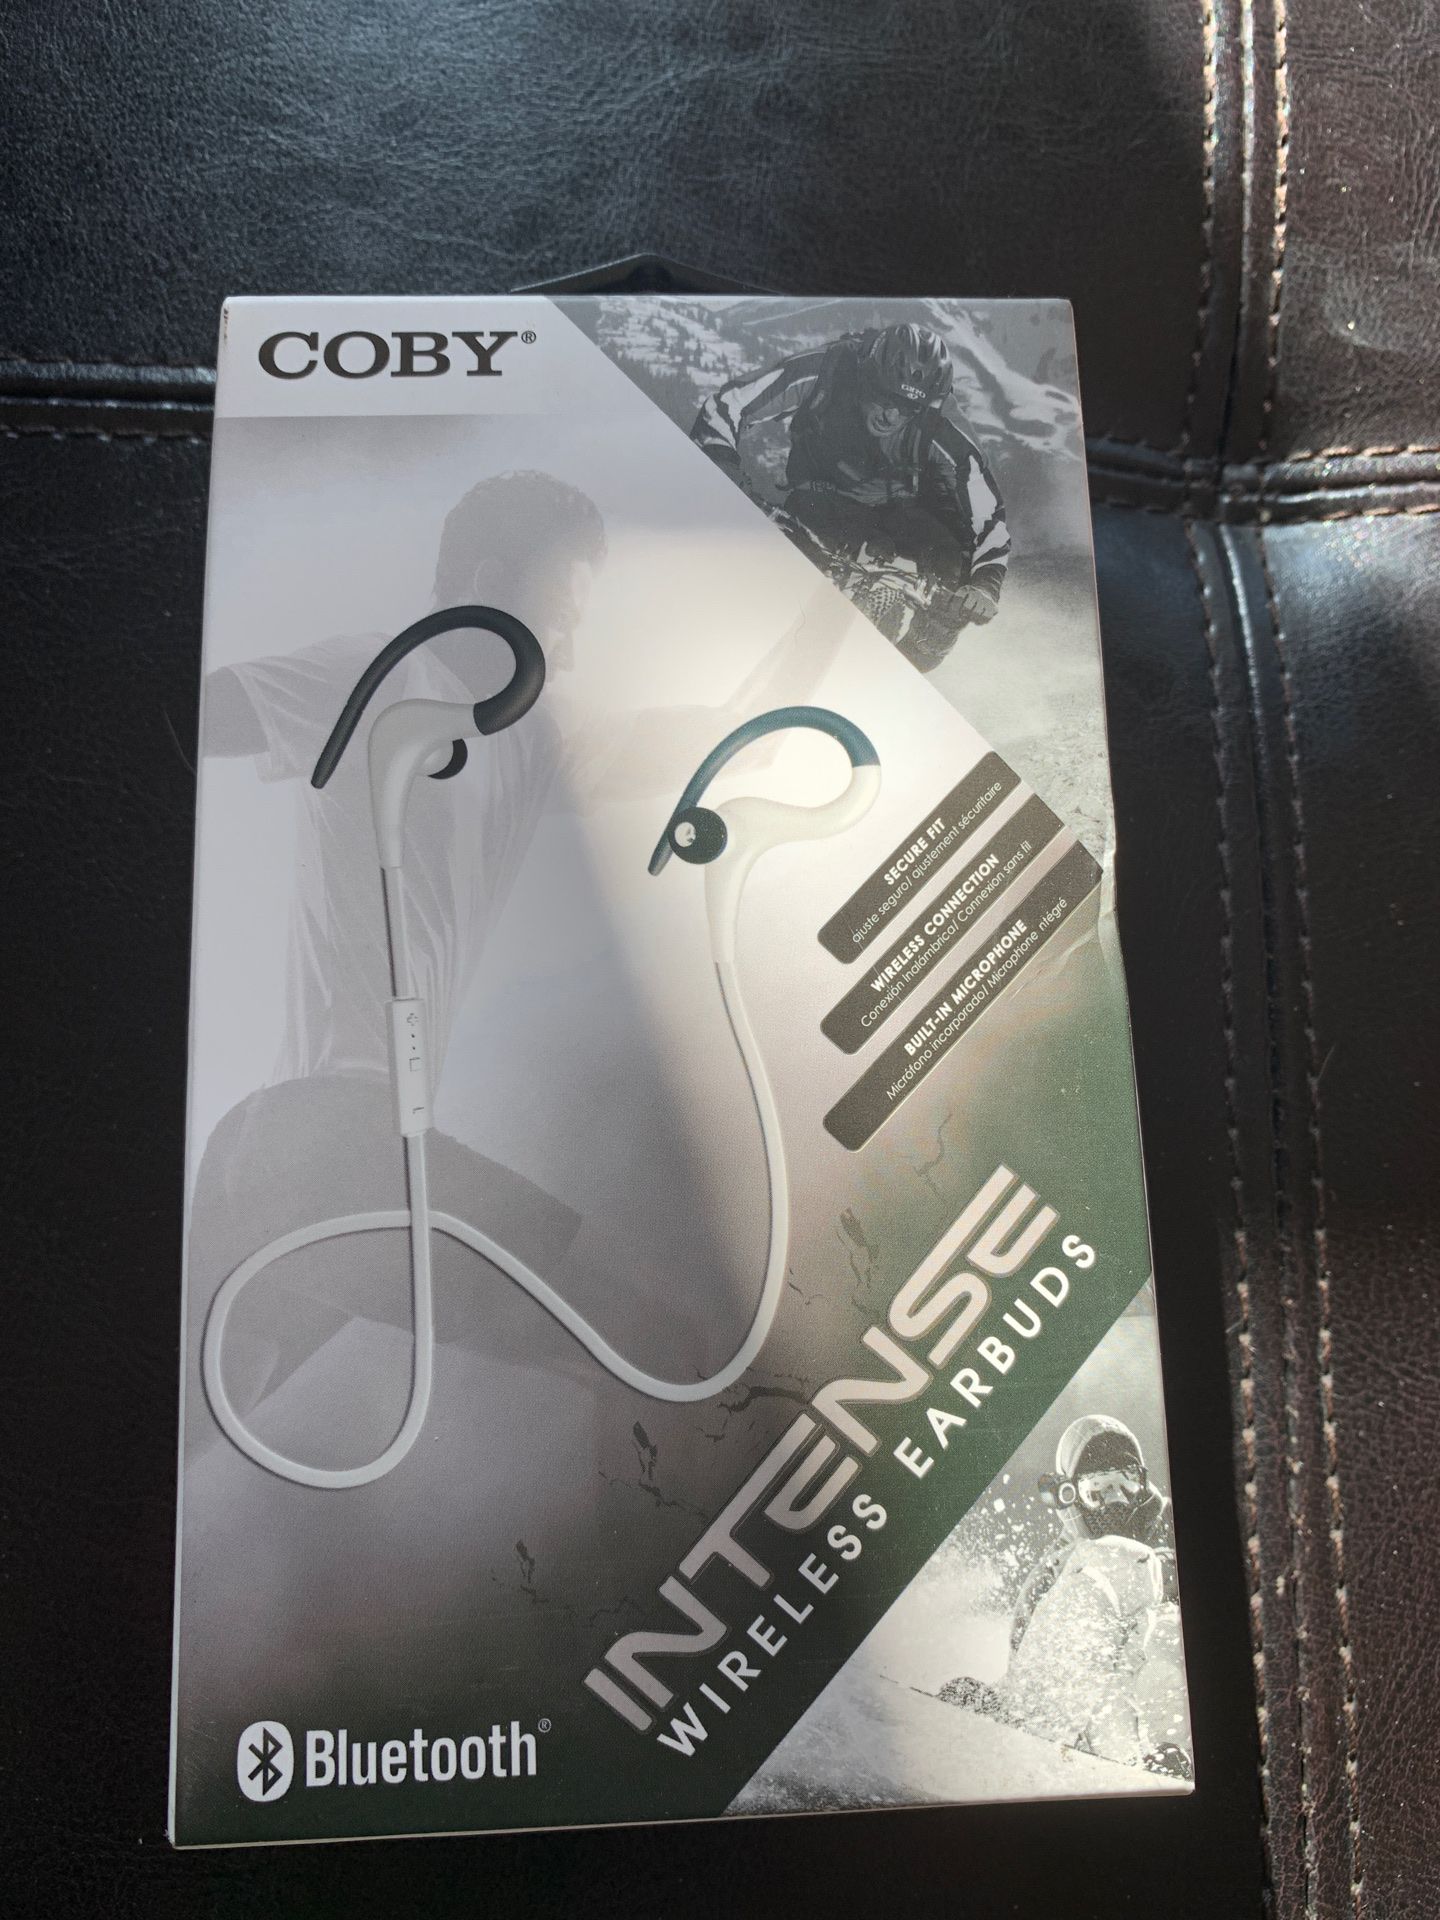 Coby wireless earbuds